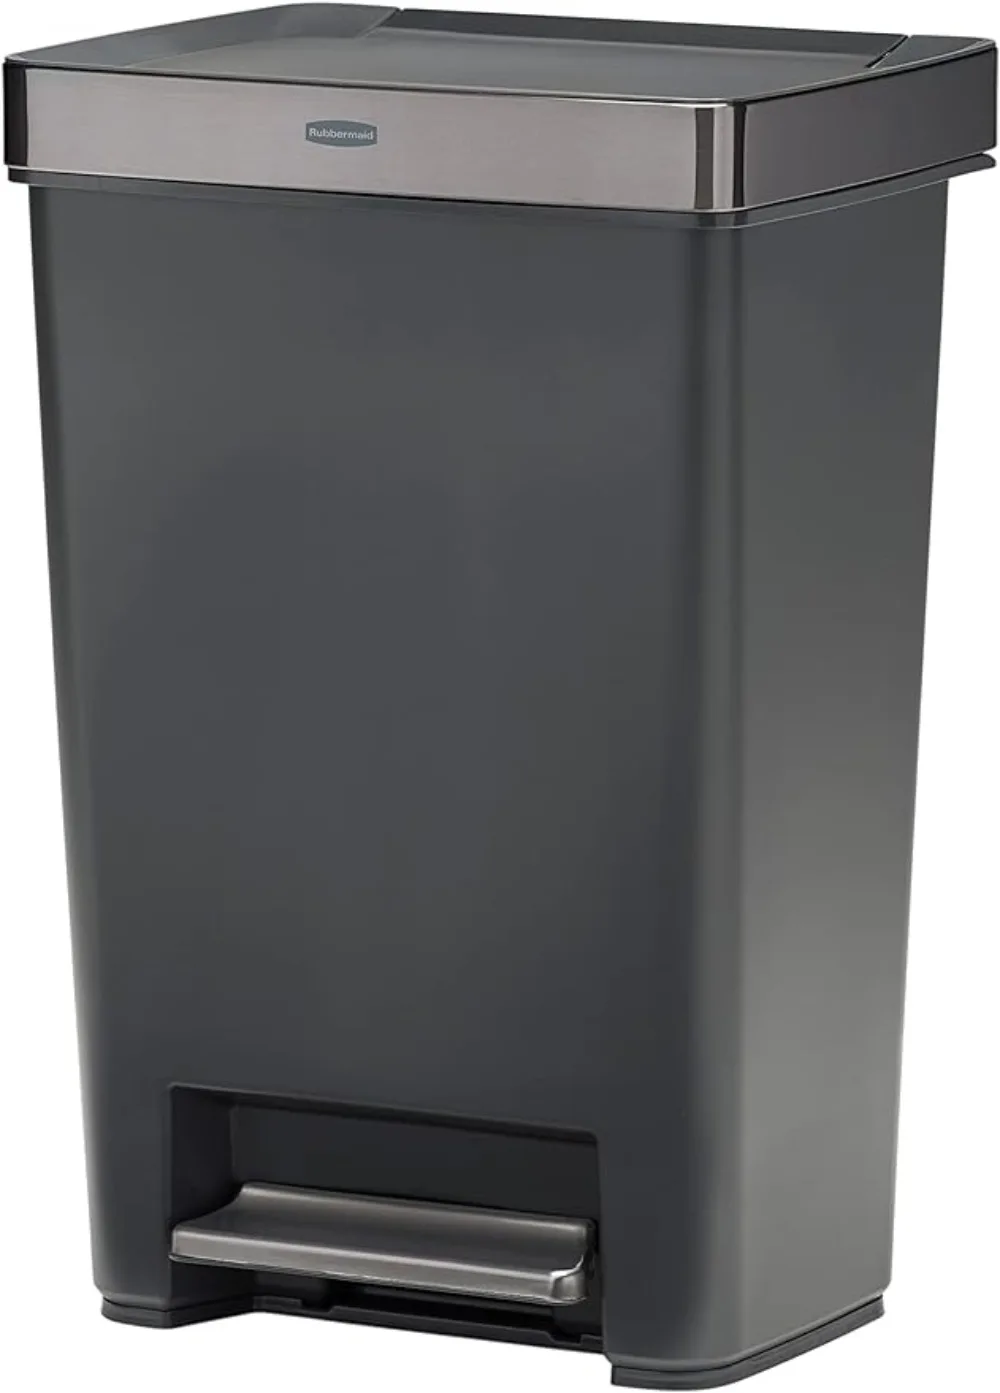 

Rubbermaid Premier Series III Step-On Trash Can for Home and Kitchen, with Stainless Steel Rim, 12.4 Gallon, Charcoal